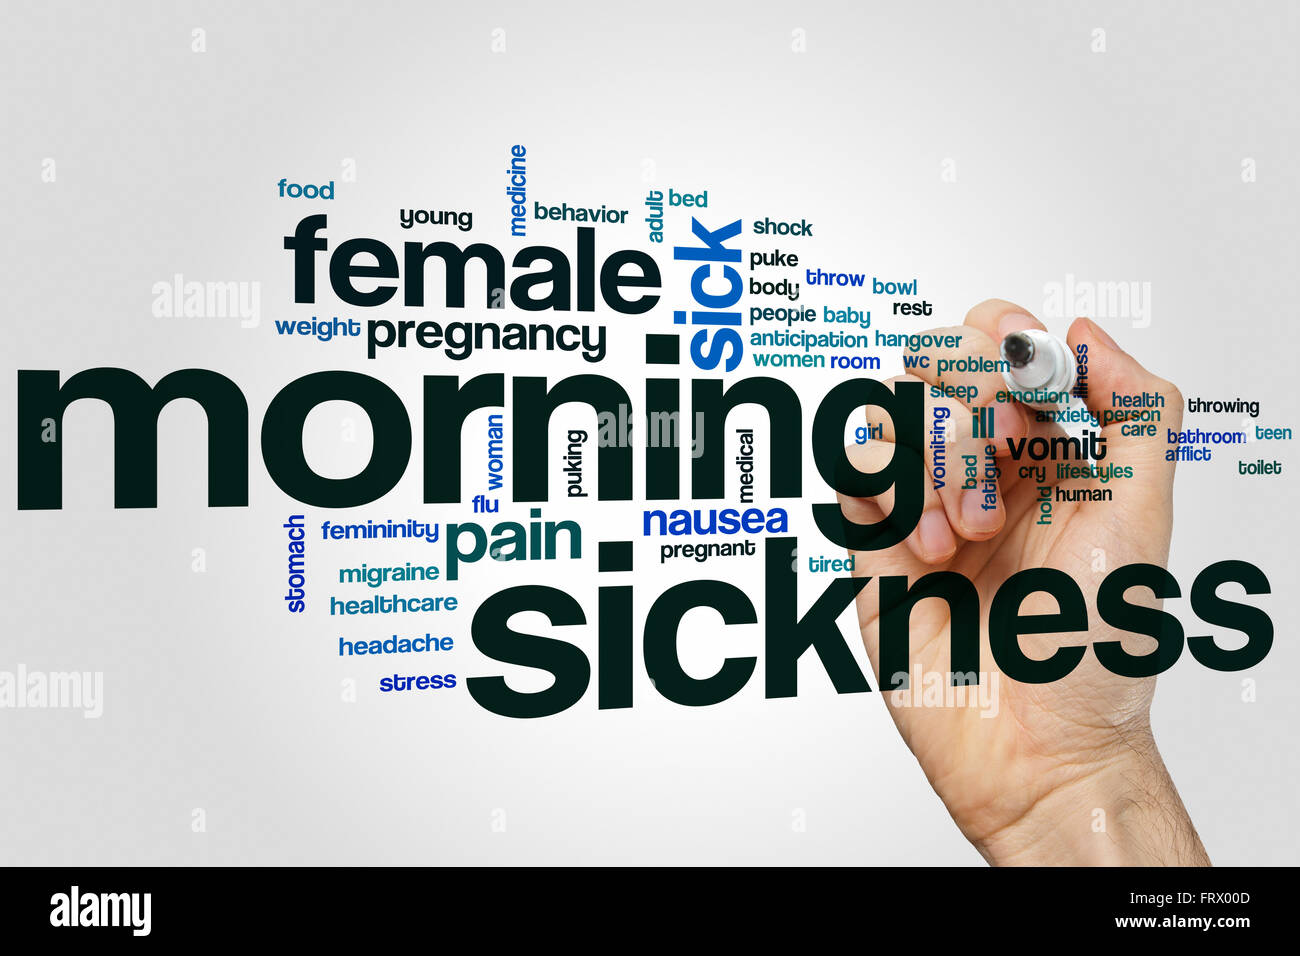 Morning sickness word cloud concept Stock Photo